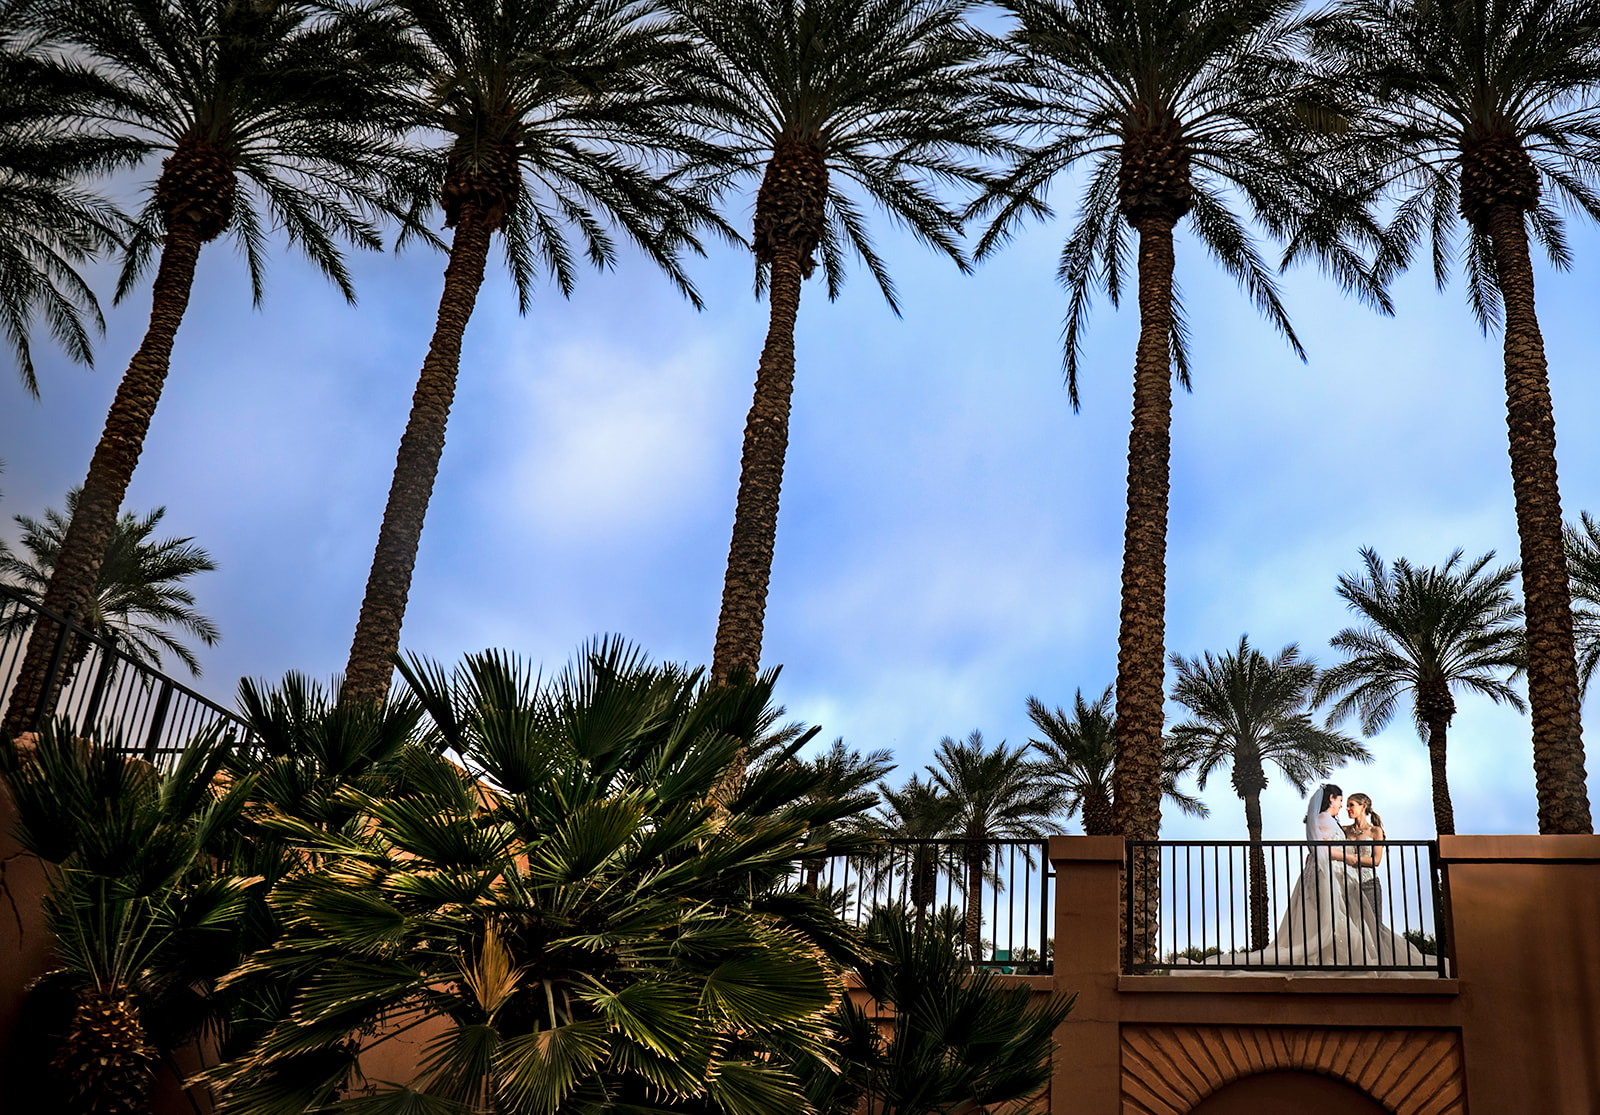 Two brides among palm trees at their wedding in Las Vegas